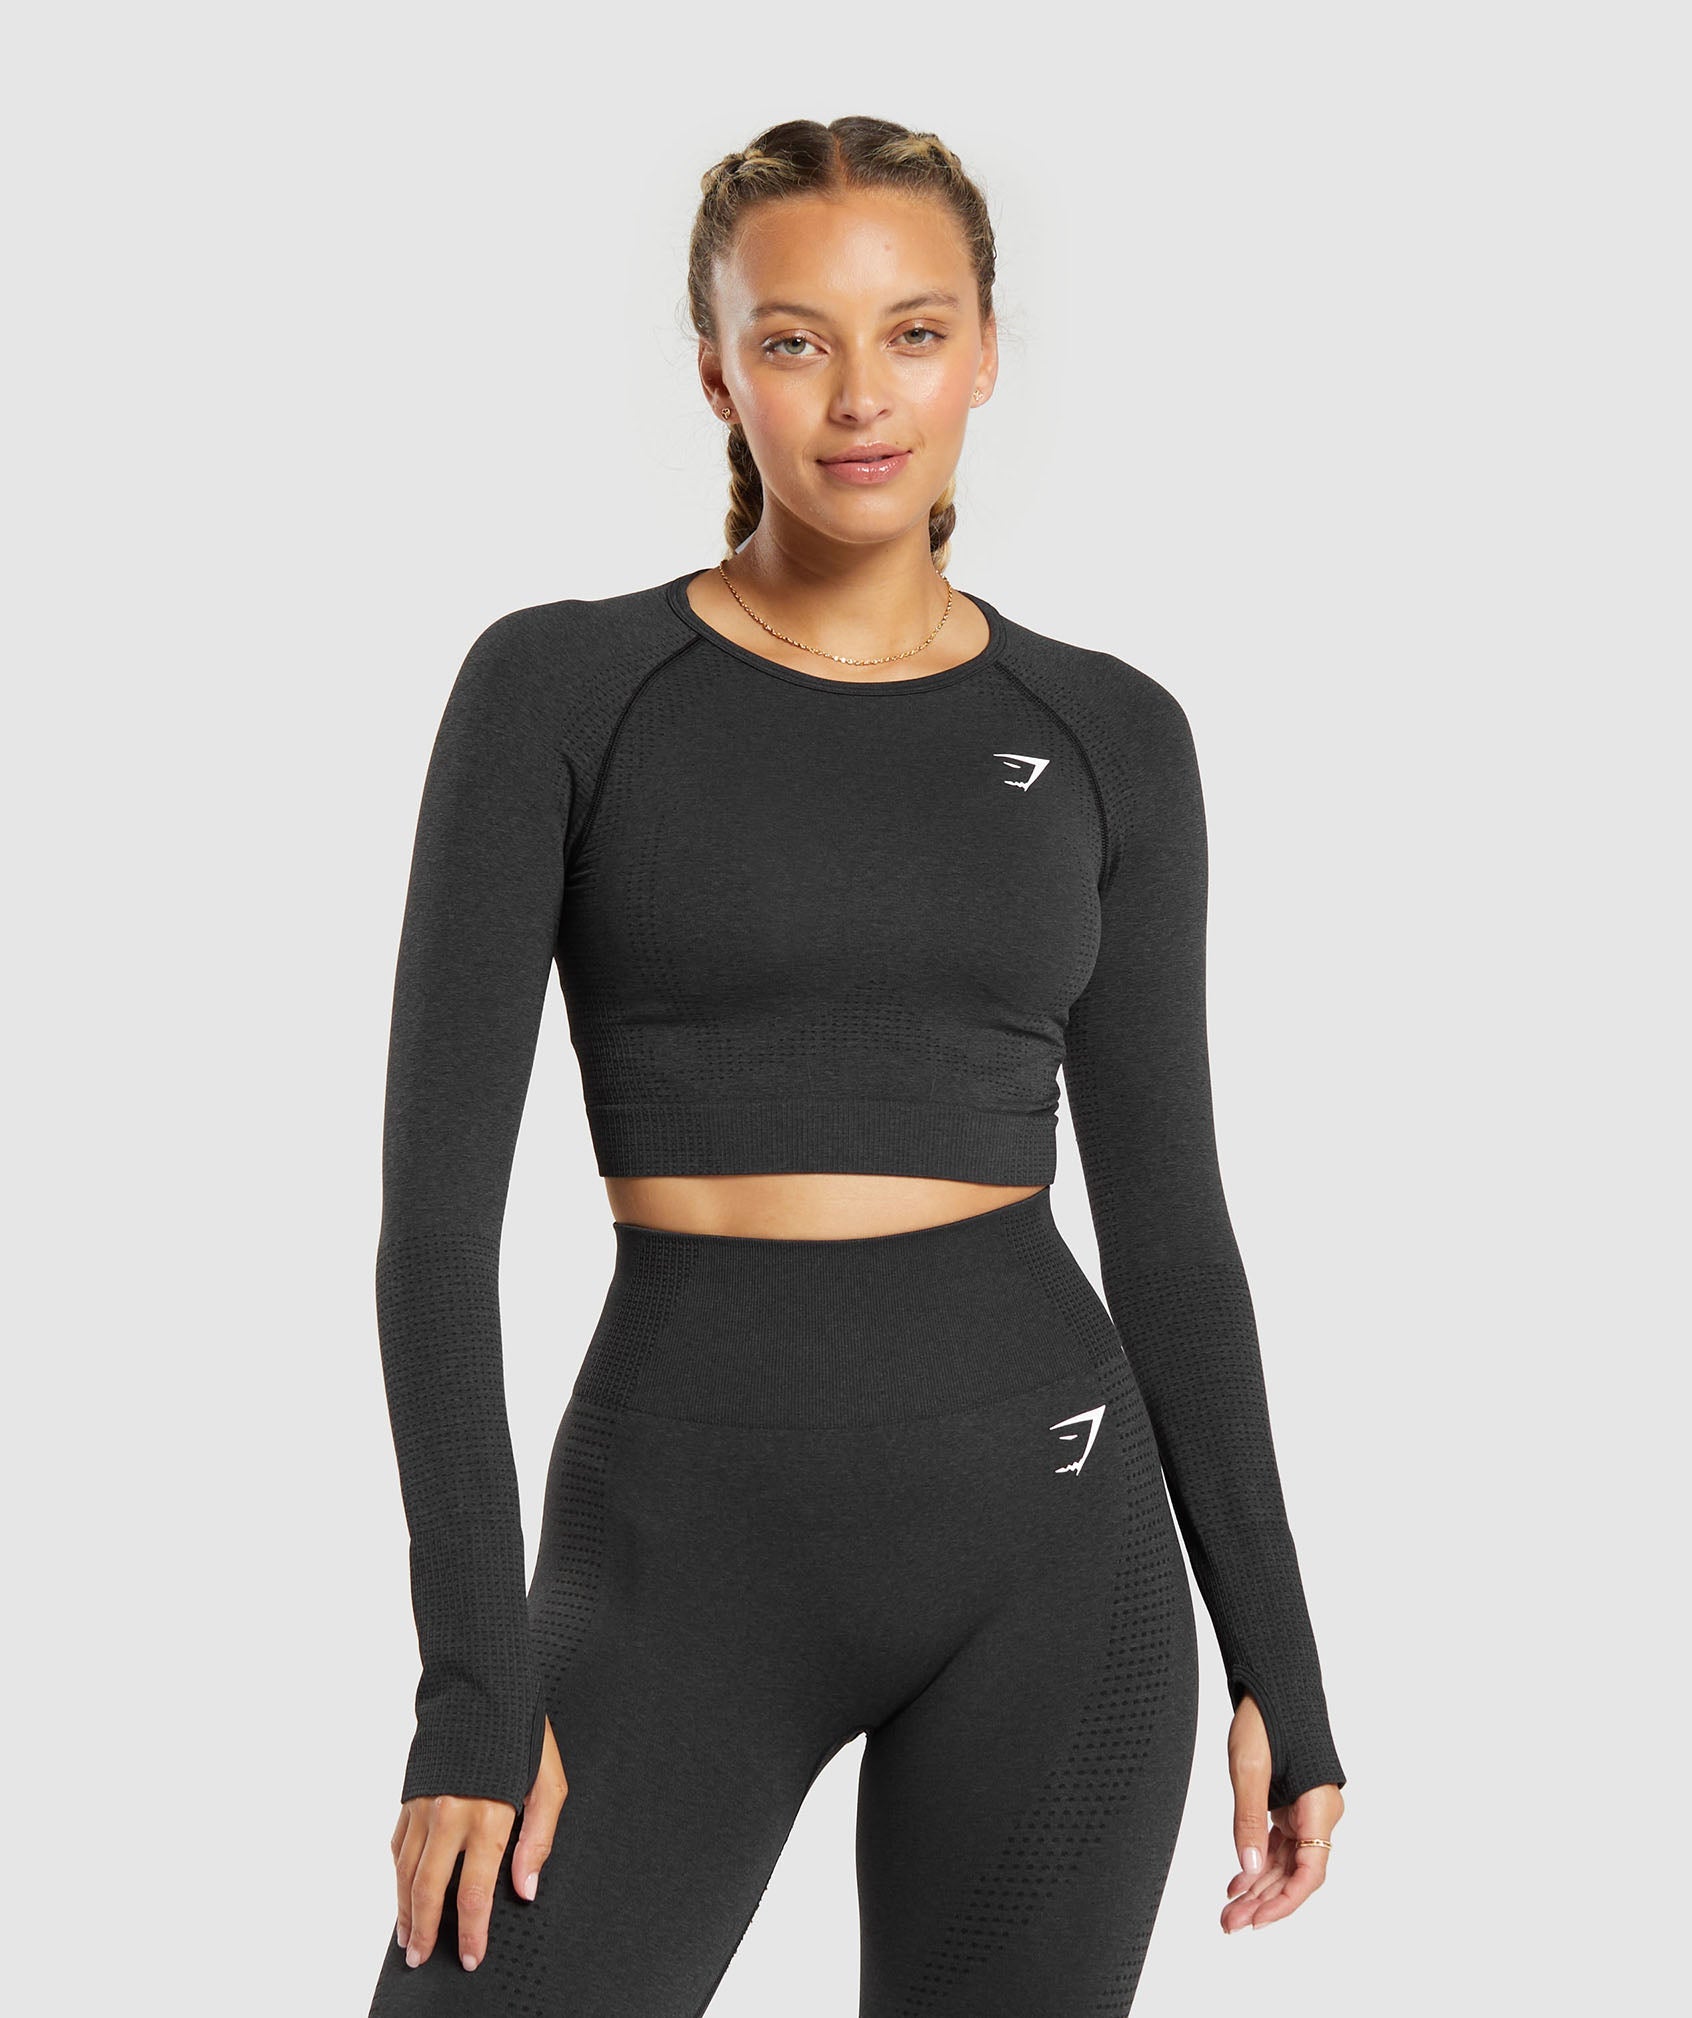 Seamless Gym Wear  Seamless Clothing From Gymshark